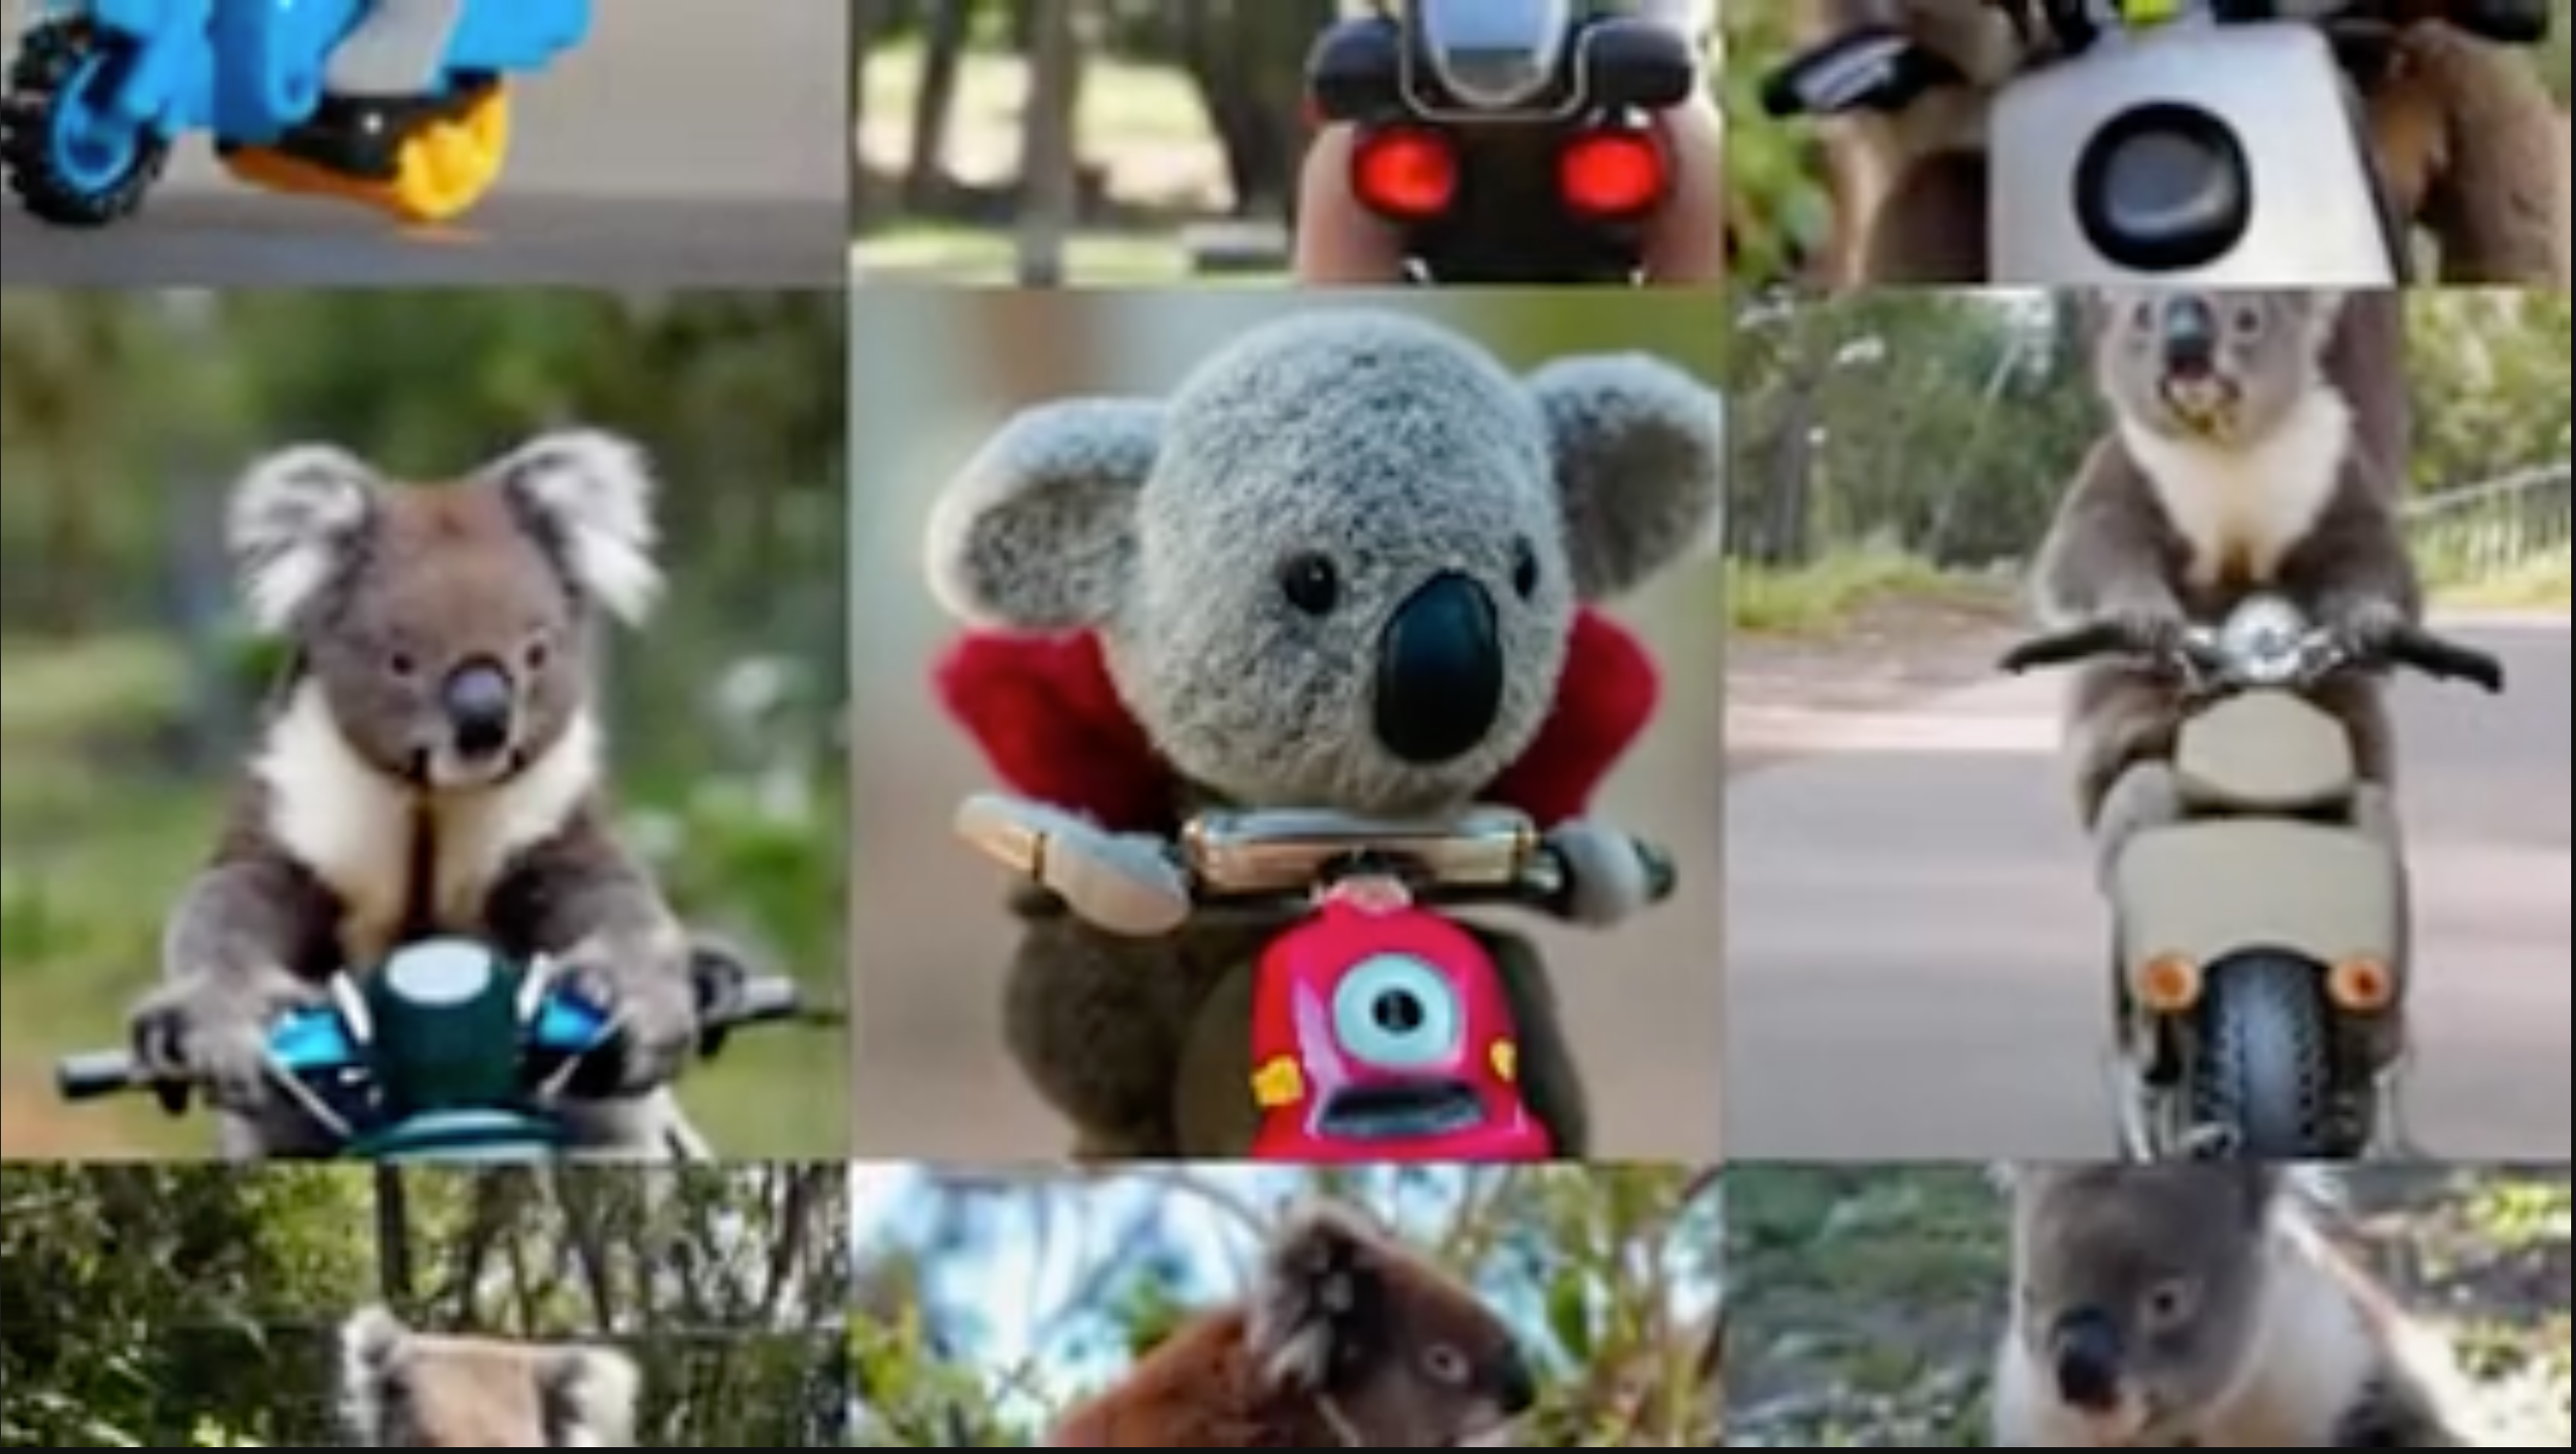 DALLE-2 generated images of koalas riding motorcycles